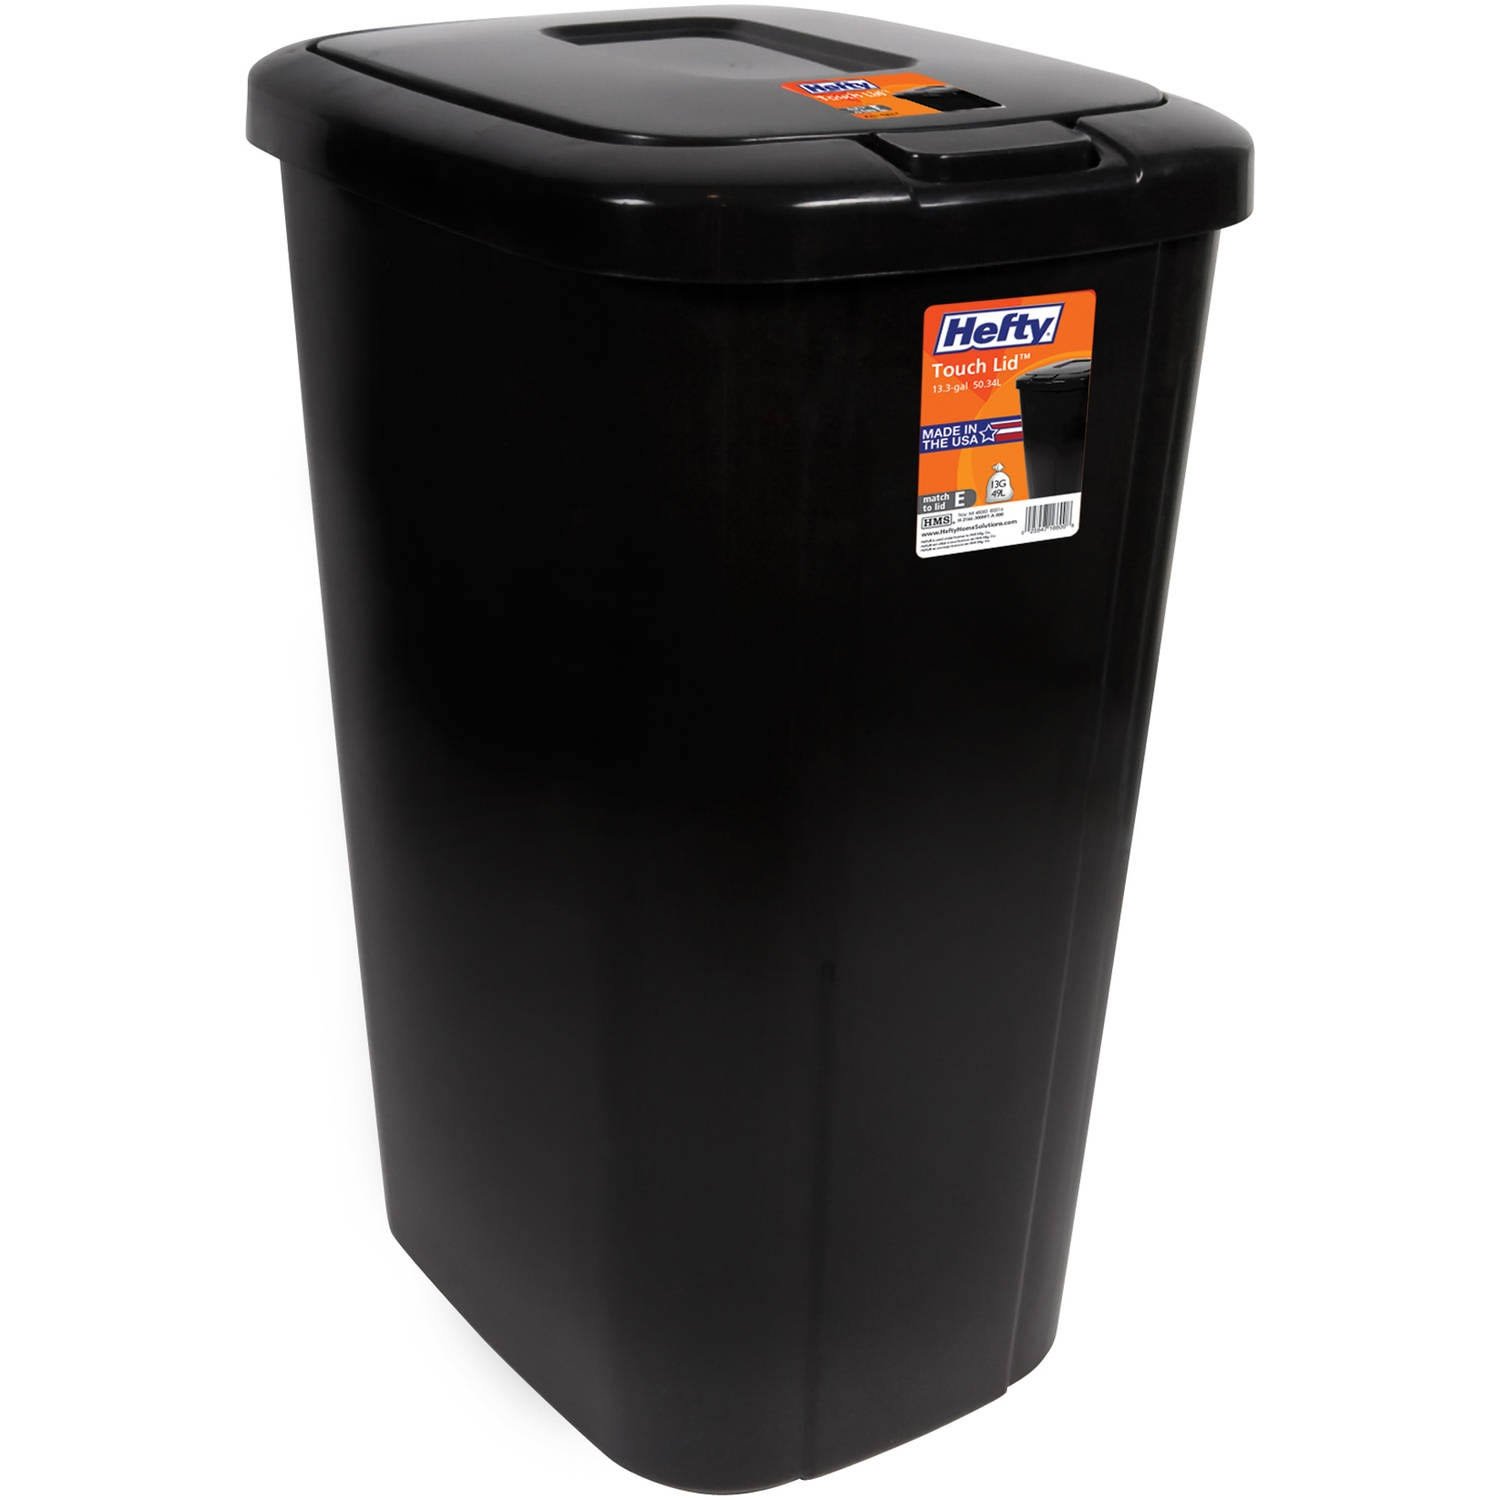 Hefty Touch-Lid 13.3-Gallon Trash Can - Black